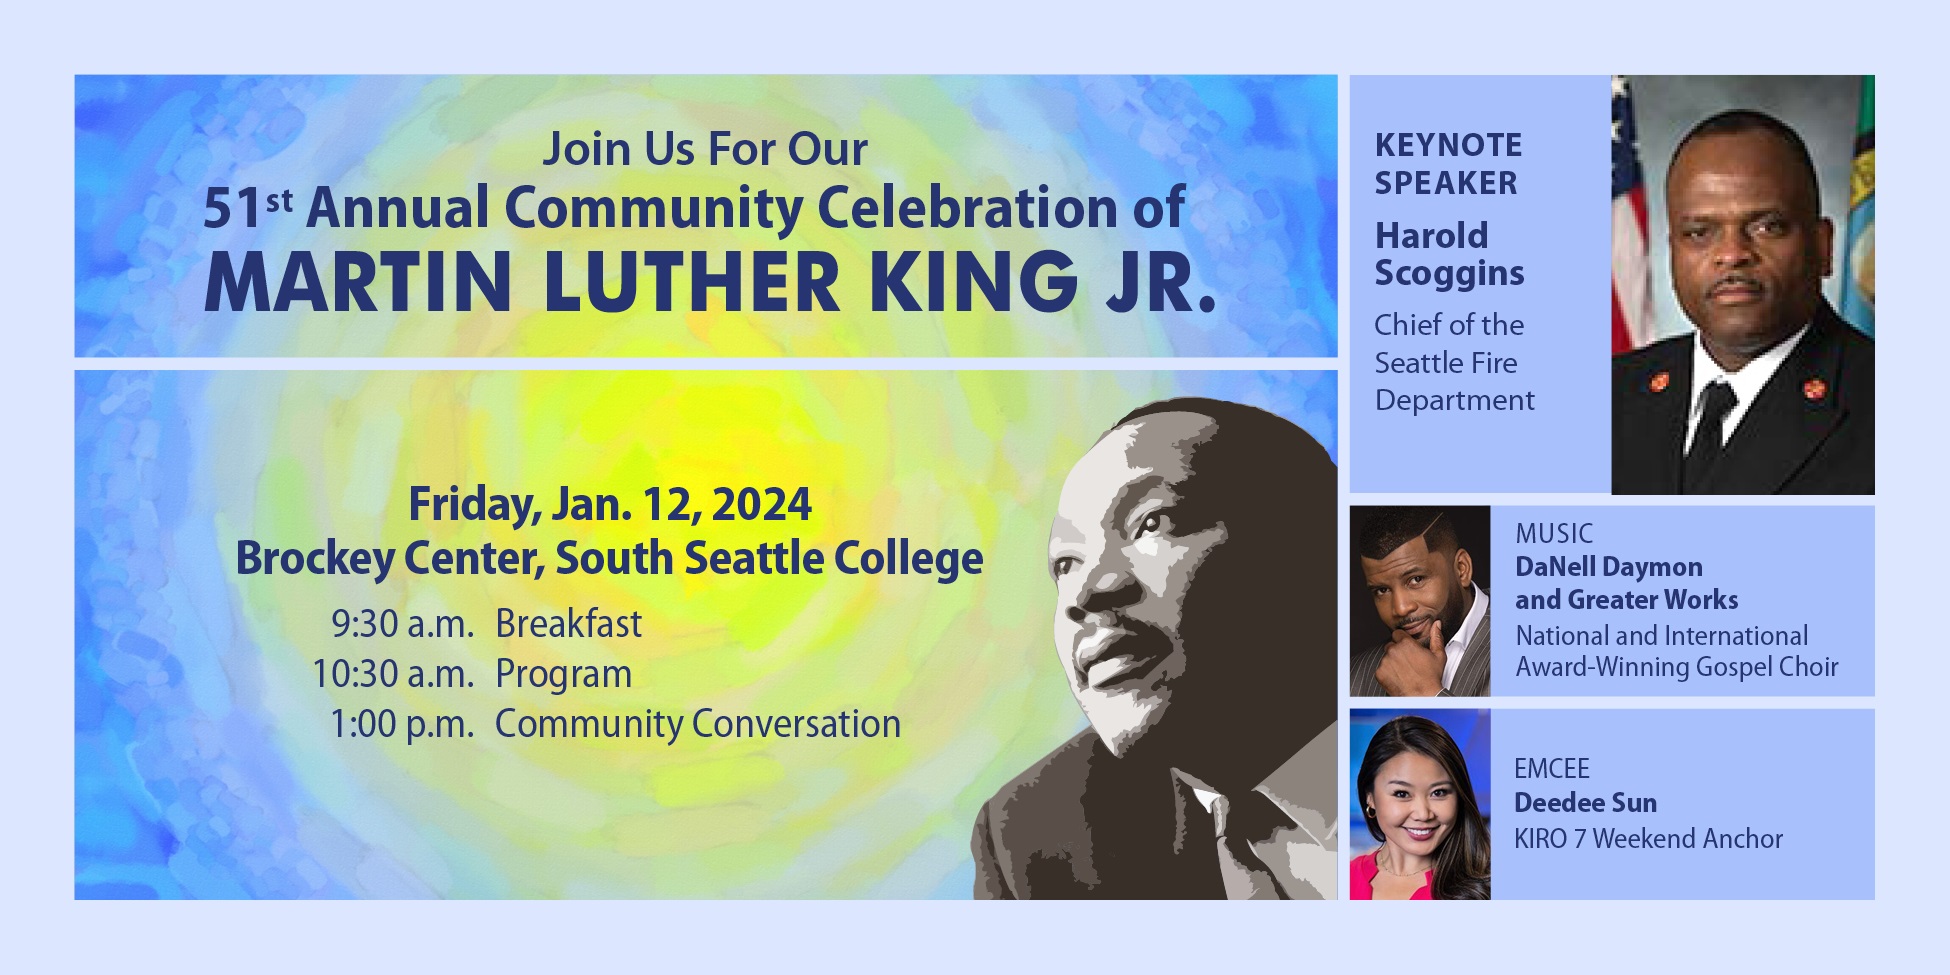 Join us for our 51st annual Martin Luther King Jr. celebration, Friday, Jan. 12, 2024 at Brockey Center, South Seattle College. 9:30 a.m. Breakfast, 10:30 a.m. program, 1 p.m. Conversation. Keynote: Harold Scroggins; Music: Danell Daymon & Greater Worksl